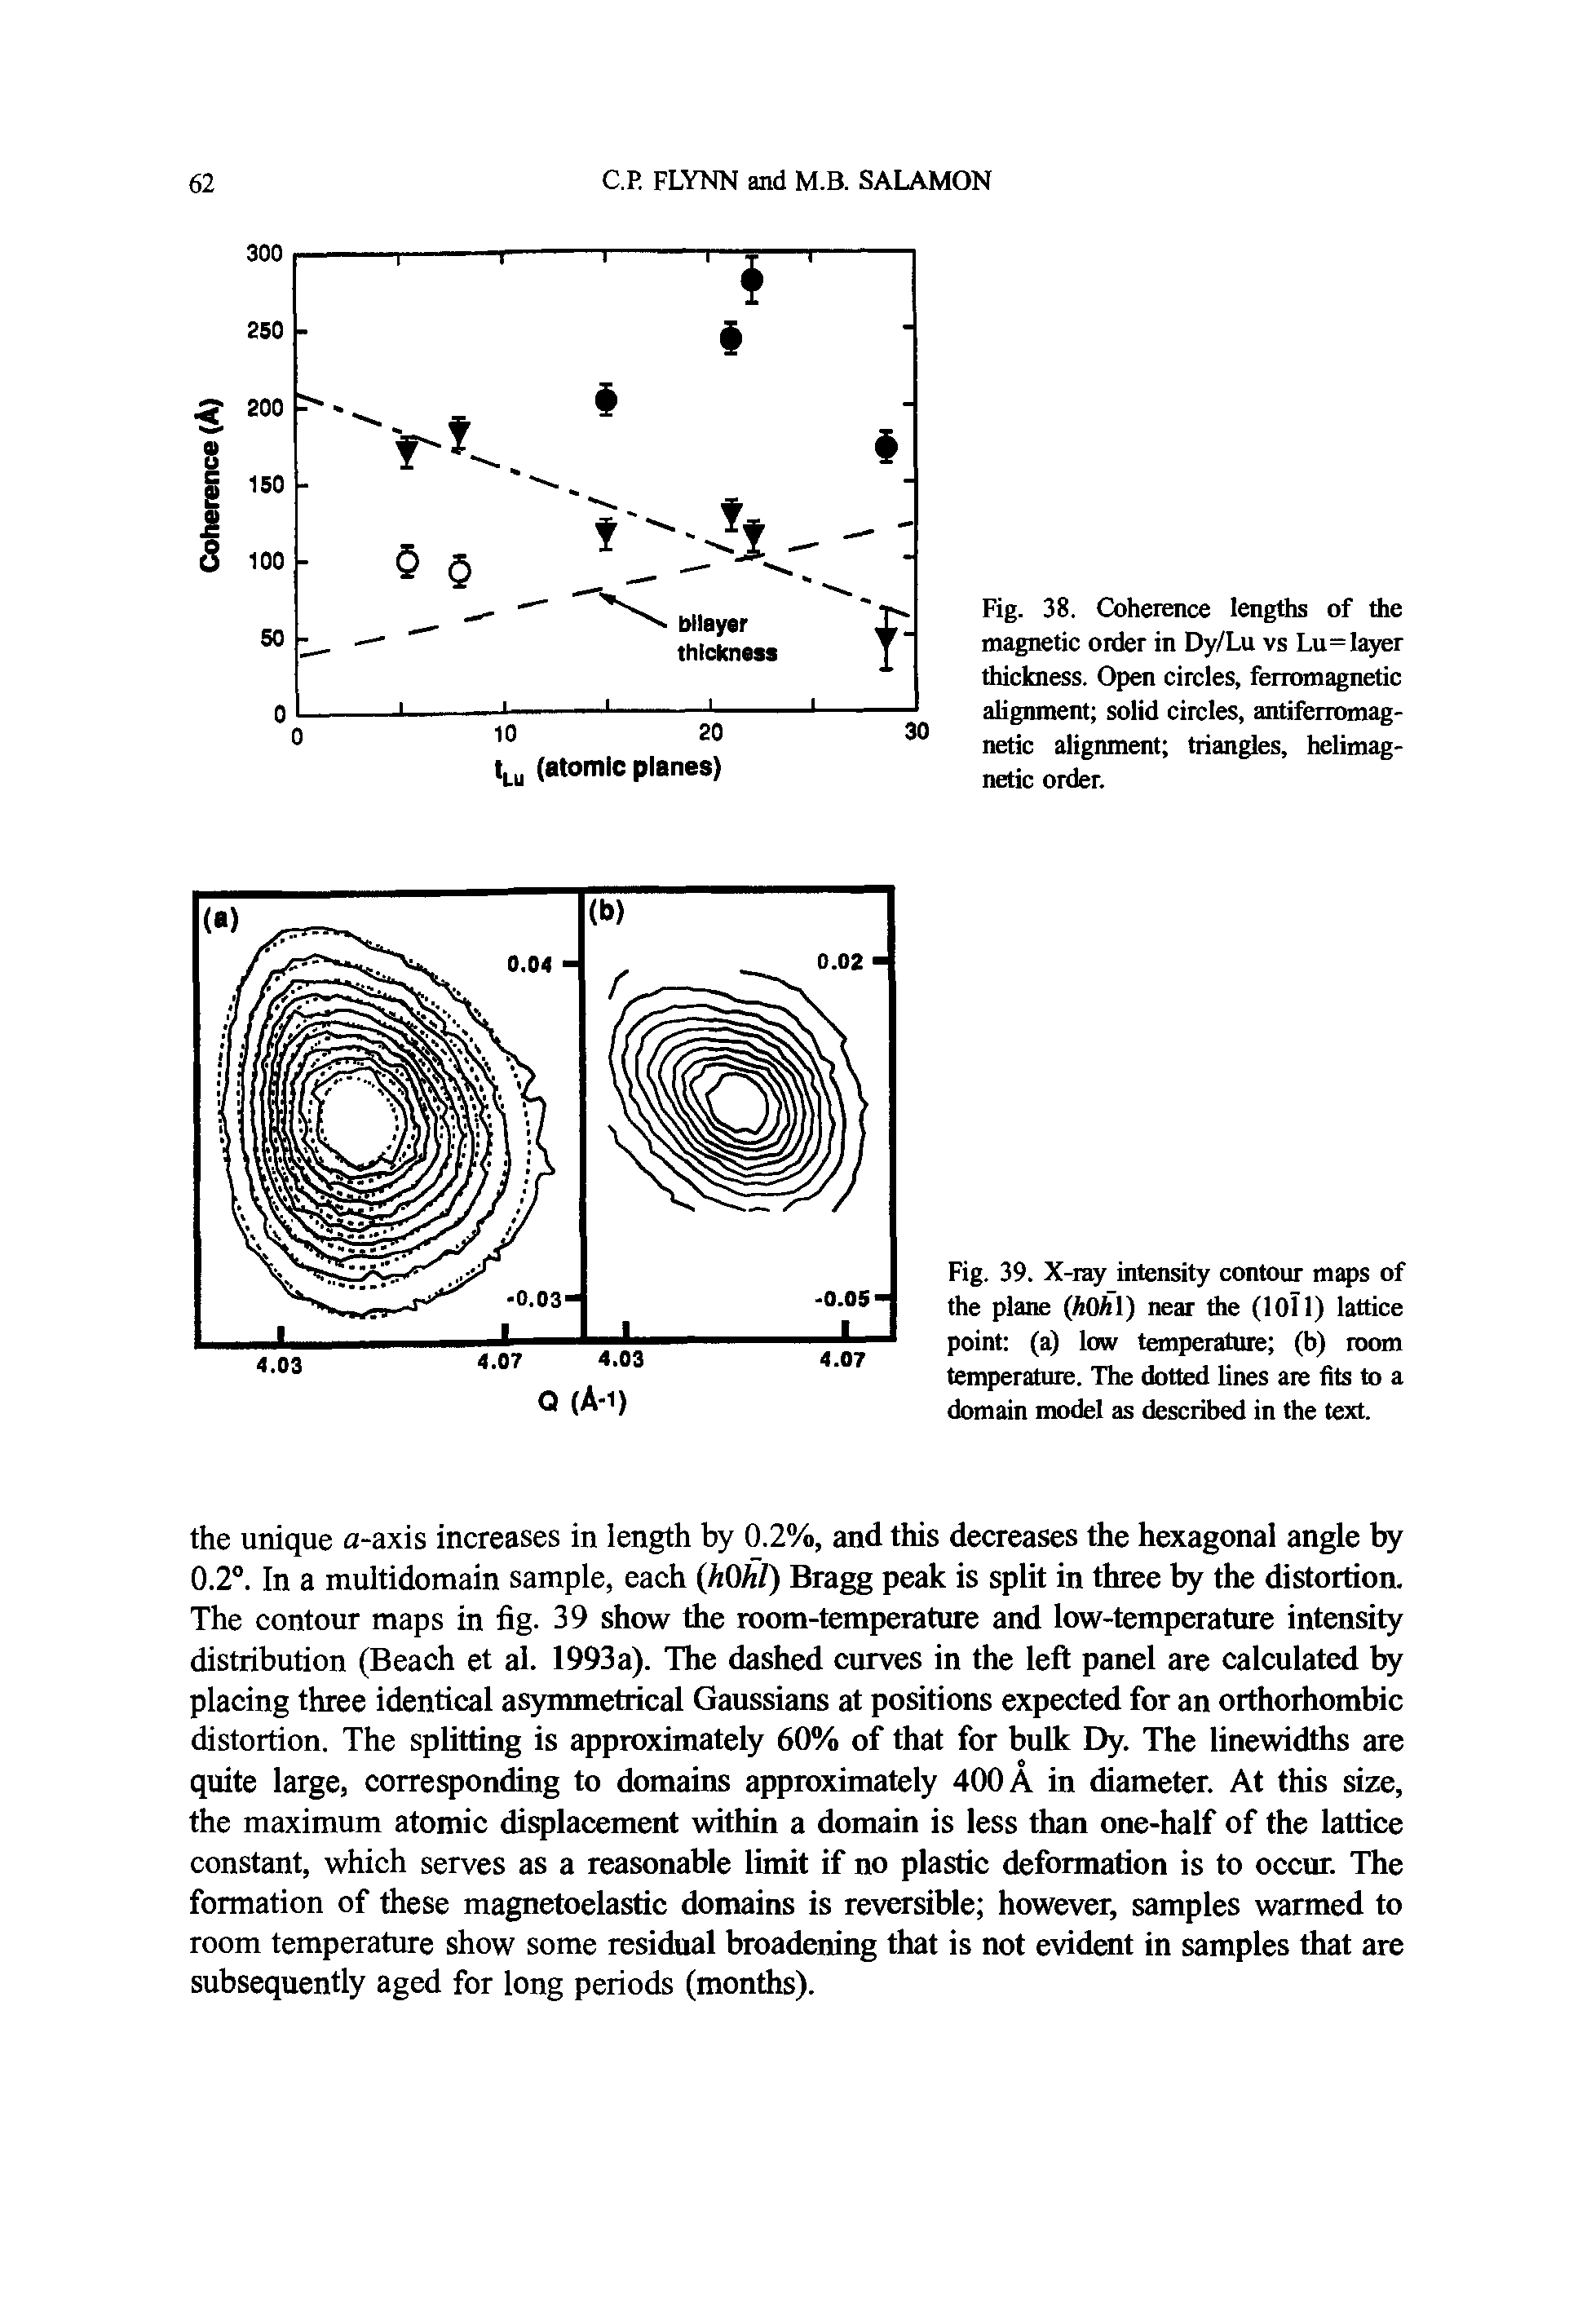 Fig. 39. X-ray intensity contour maps of the plane (hOhl) near the (lOTl) lattice point (a) low temperature (b) room temperature. The dotted lines ate fits to a domain model as described in the text.